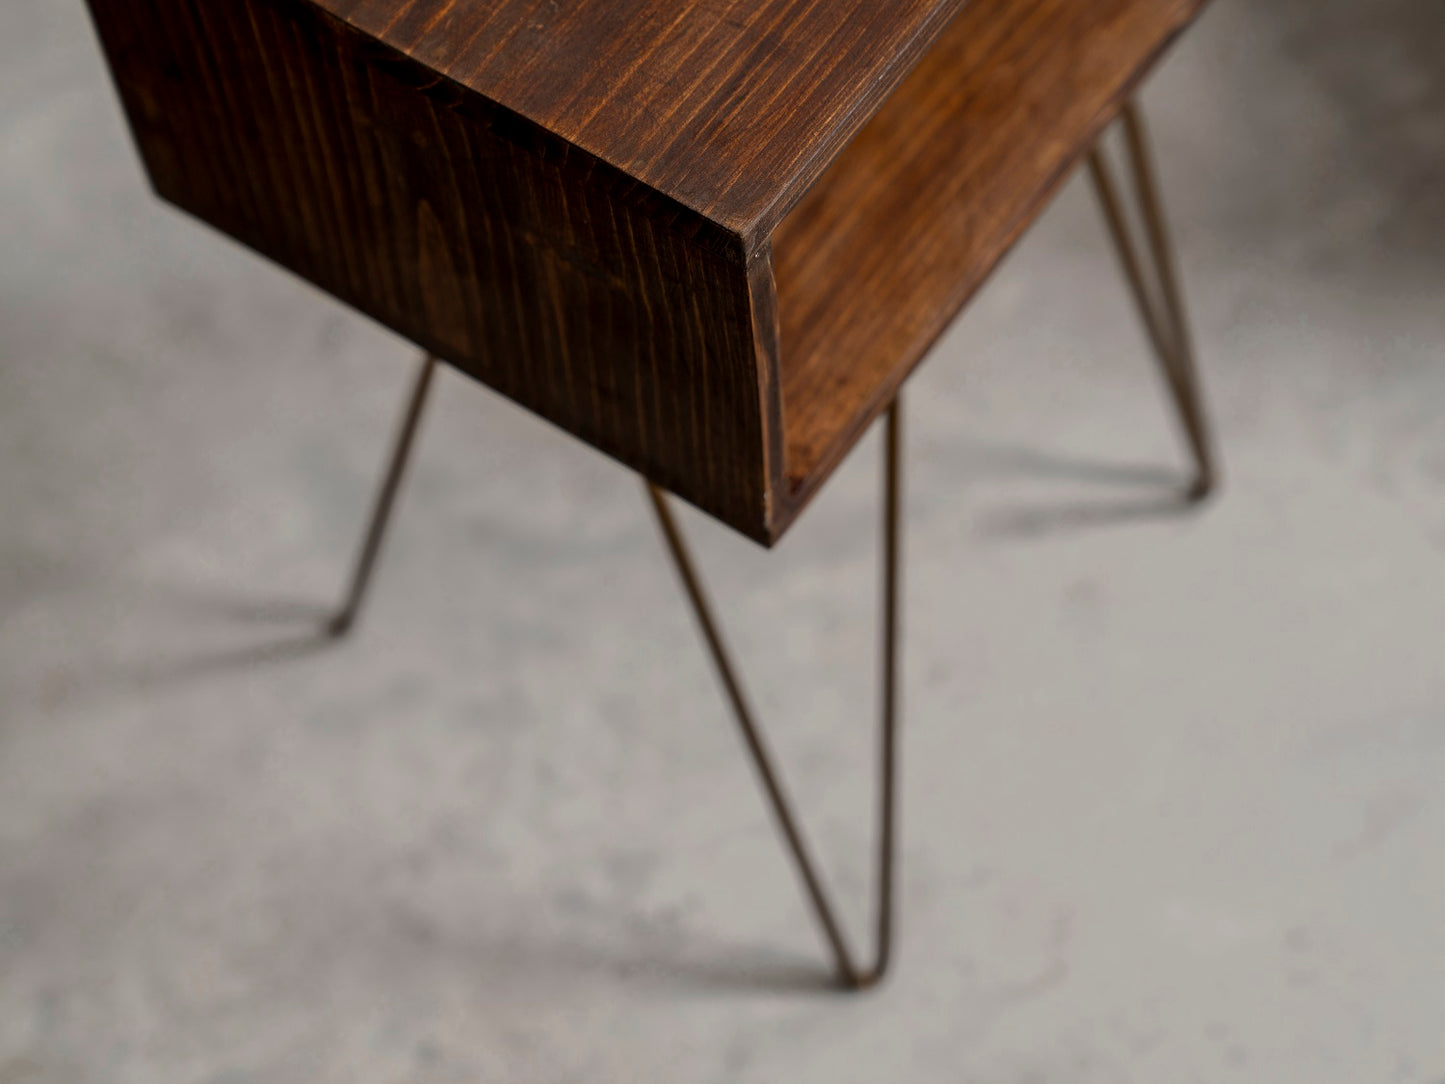 Walnut Tint Amalgam Side Tables, Wooden Tables, Bedside Tables, End Tables, Living Room Decor by A Tiny Mistake